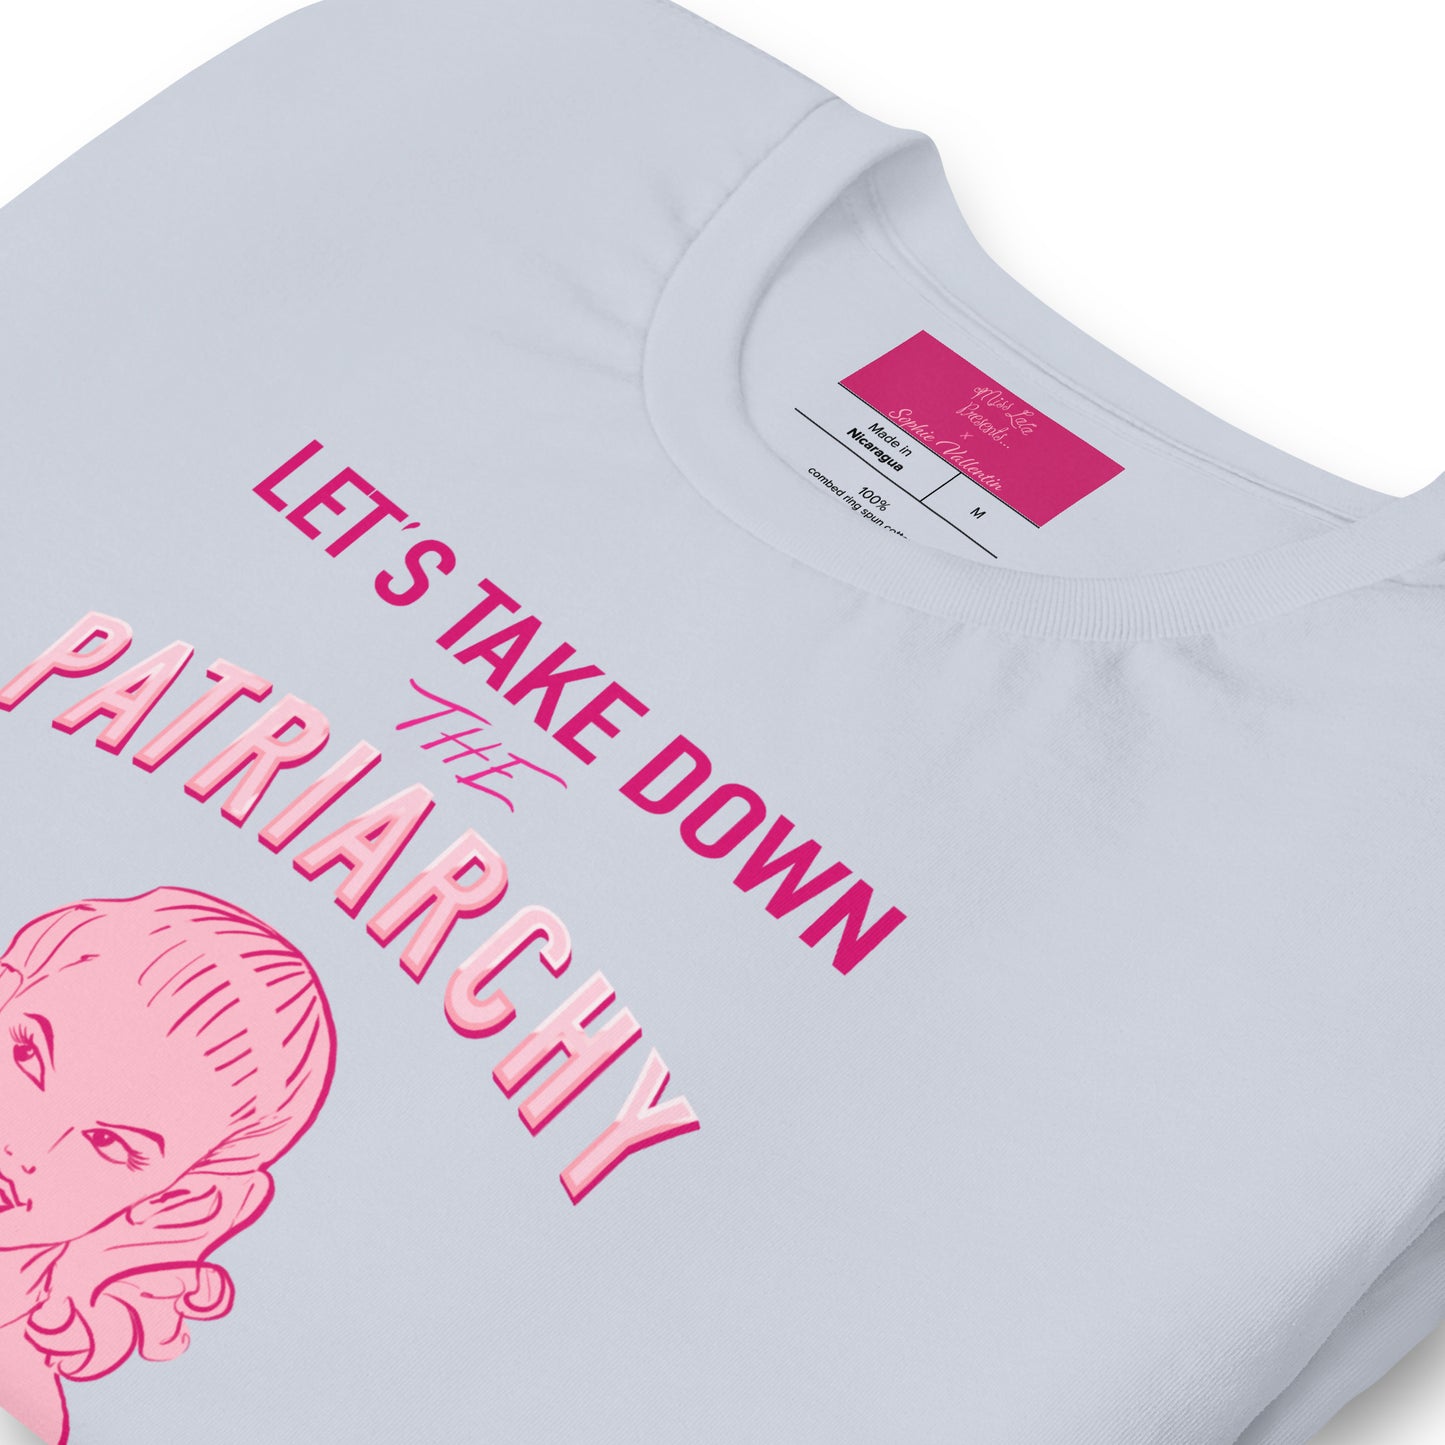 Lets Take Down The Patriarchy Tee in Lilac or Light Blue